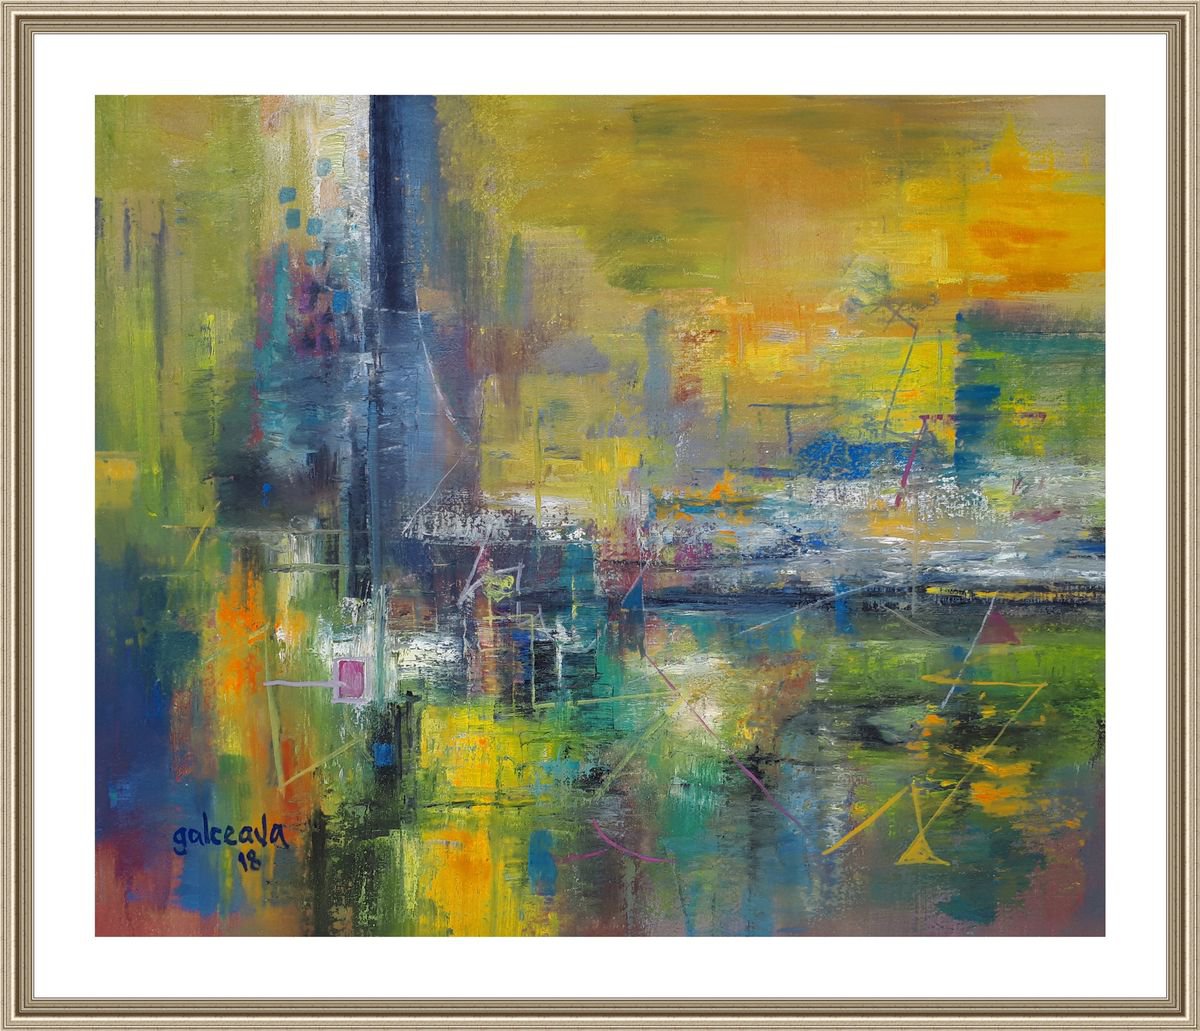 Transcendent Light, modern abstract painting, oil canvas, original art painting, 50x60 cm by Constantin Galceava